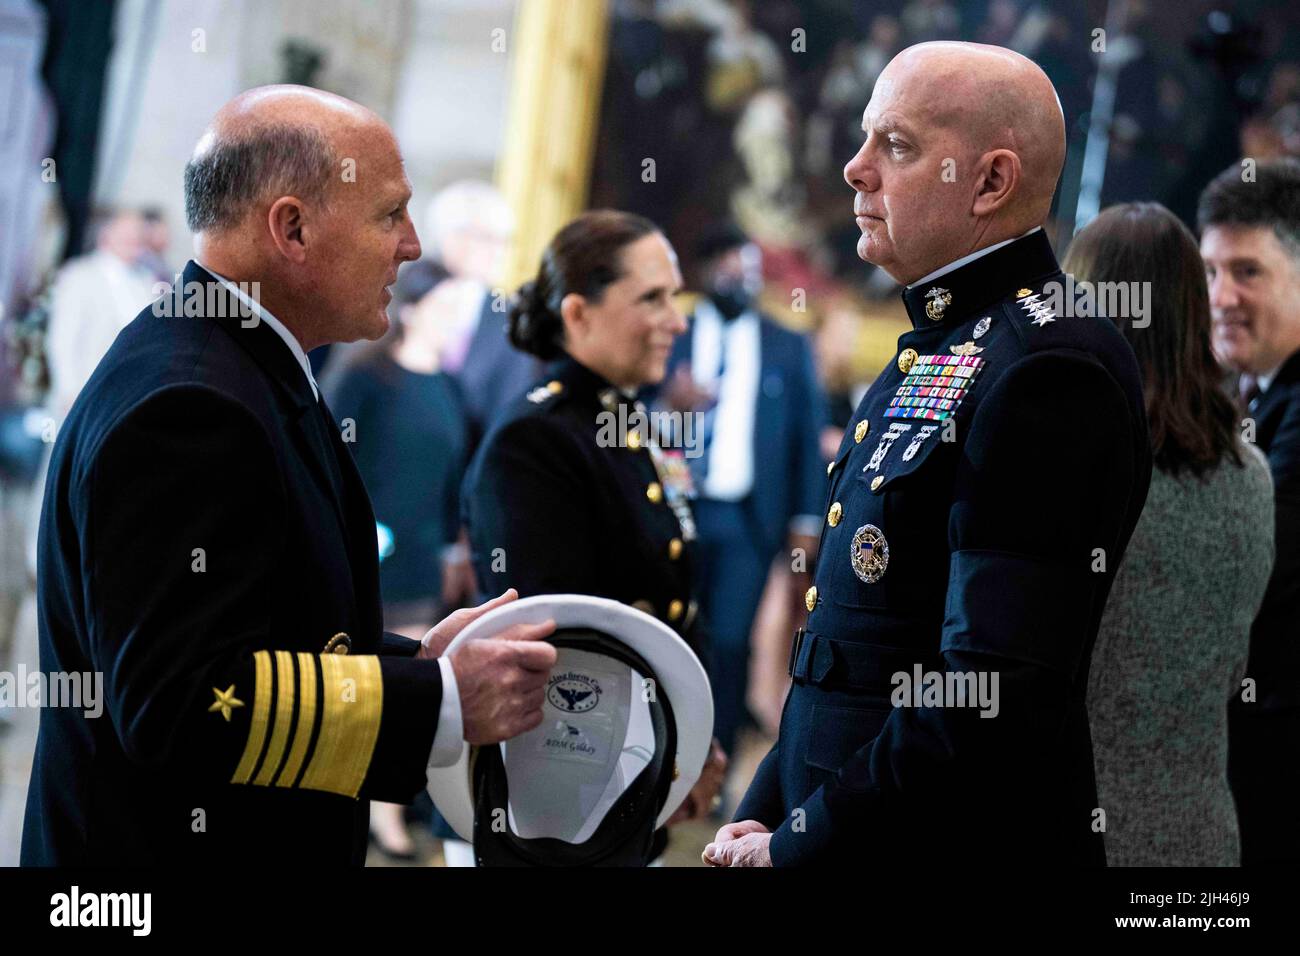 Washington DC, USA. 14th July, 2022. Commandant of the Marine Corps Gen. David H. Berger, right, and Chief of Naval Operations Adm. Mike Gilday, are seen before the remains of Hershel Woodrow “Woody” Williams, the last Medal of Honor recipient of World War II to pass away, were to lie in honor in the U.S. Capitol Rotunda in Washington, DC, USA, on Thursday, July 14, 2022. Williams, who passed away at age 98, received the award for action in the Battle of Iwo Jima. Photo by Tom Williams/Pool/ABACAPRESS.COM Credit: Abaca Press/Alamy Live News Stock Photo